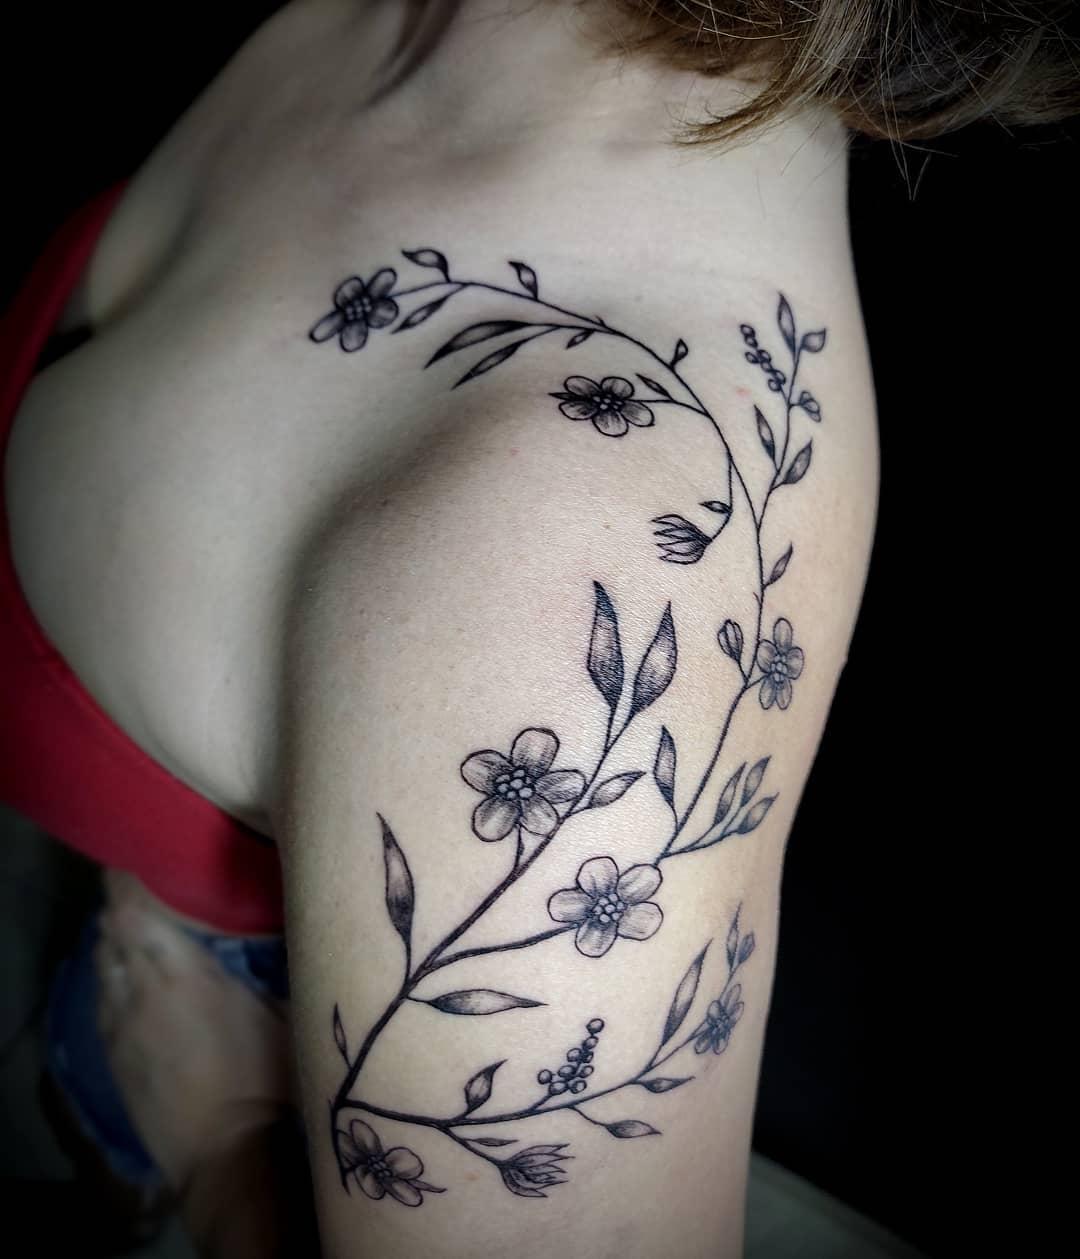 15+ Super Cool Tattoos For Women images 15